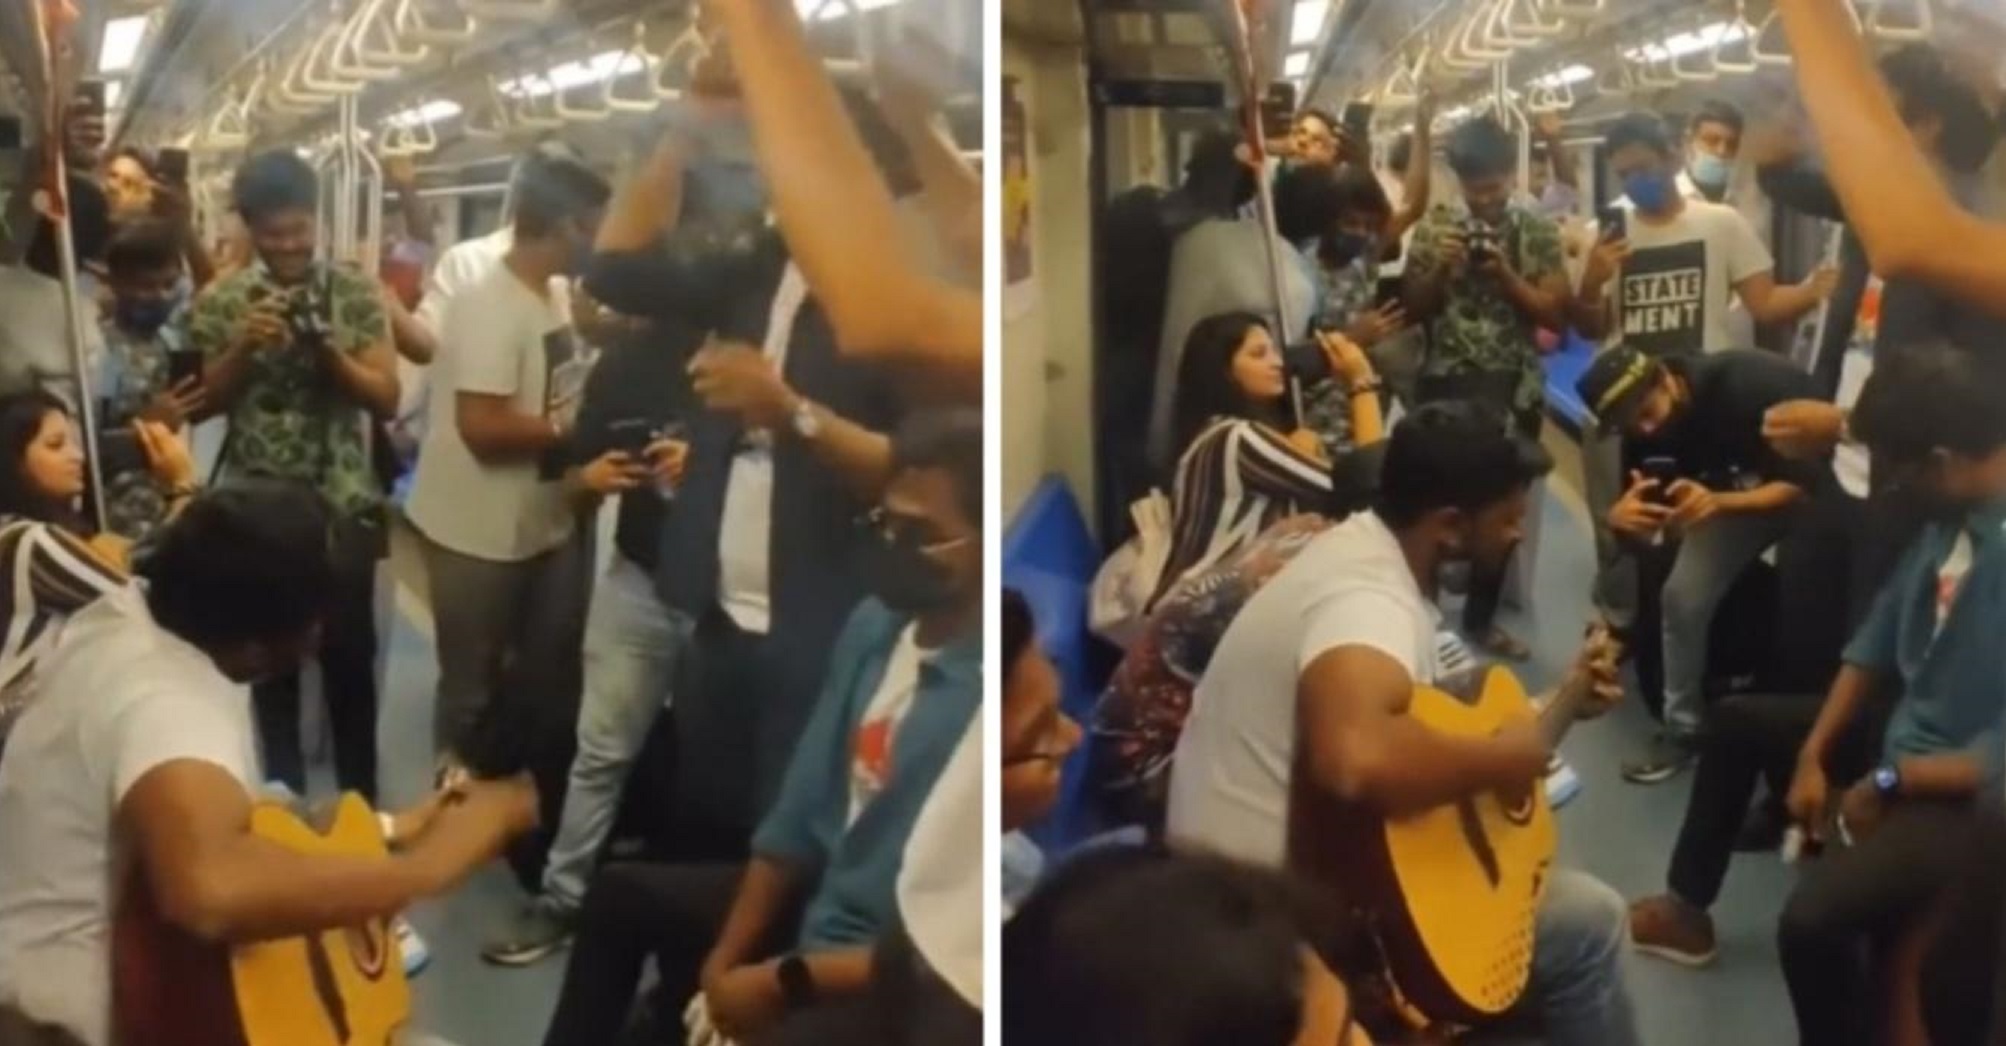 Music Brings Strangers Together: Passengers Sing Along To AR Rahman Songs In Chennai Metro In Viral Video